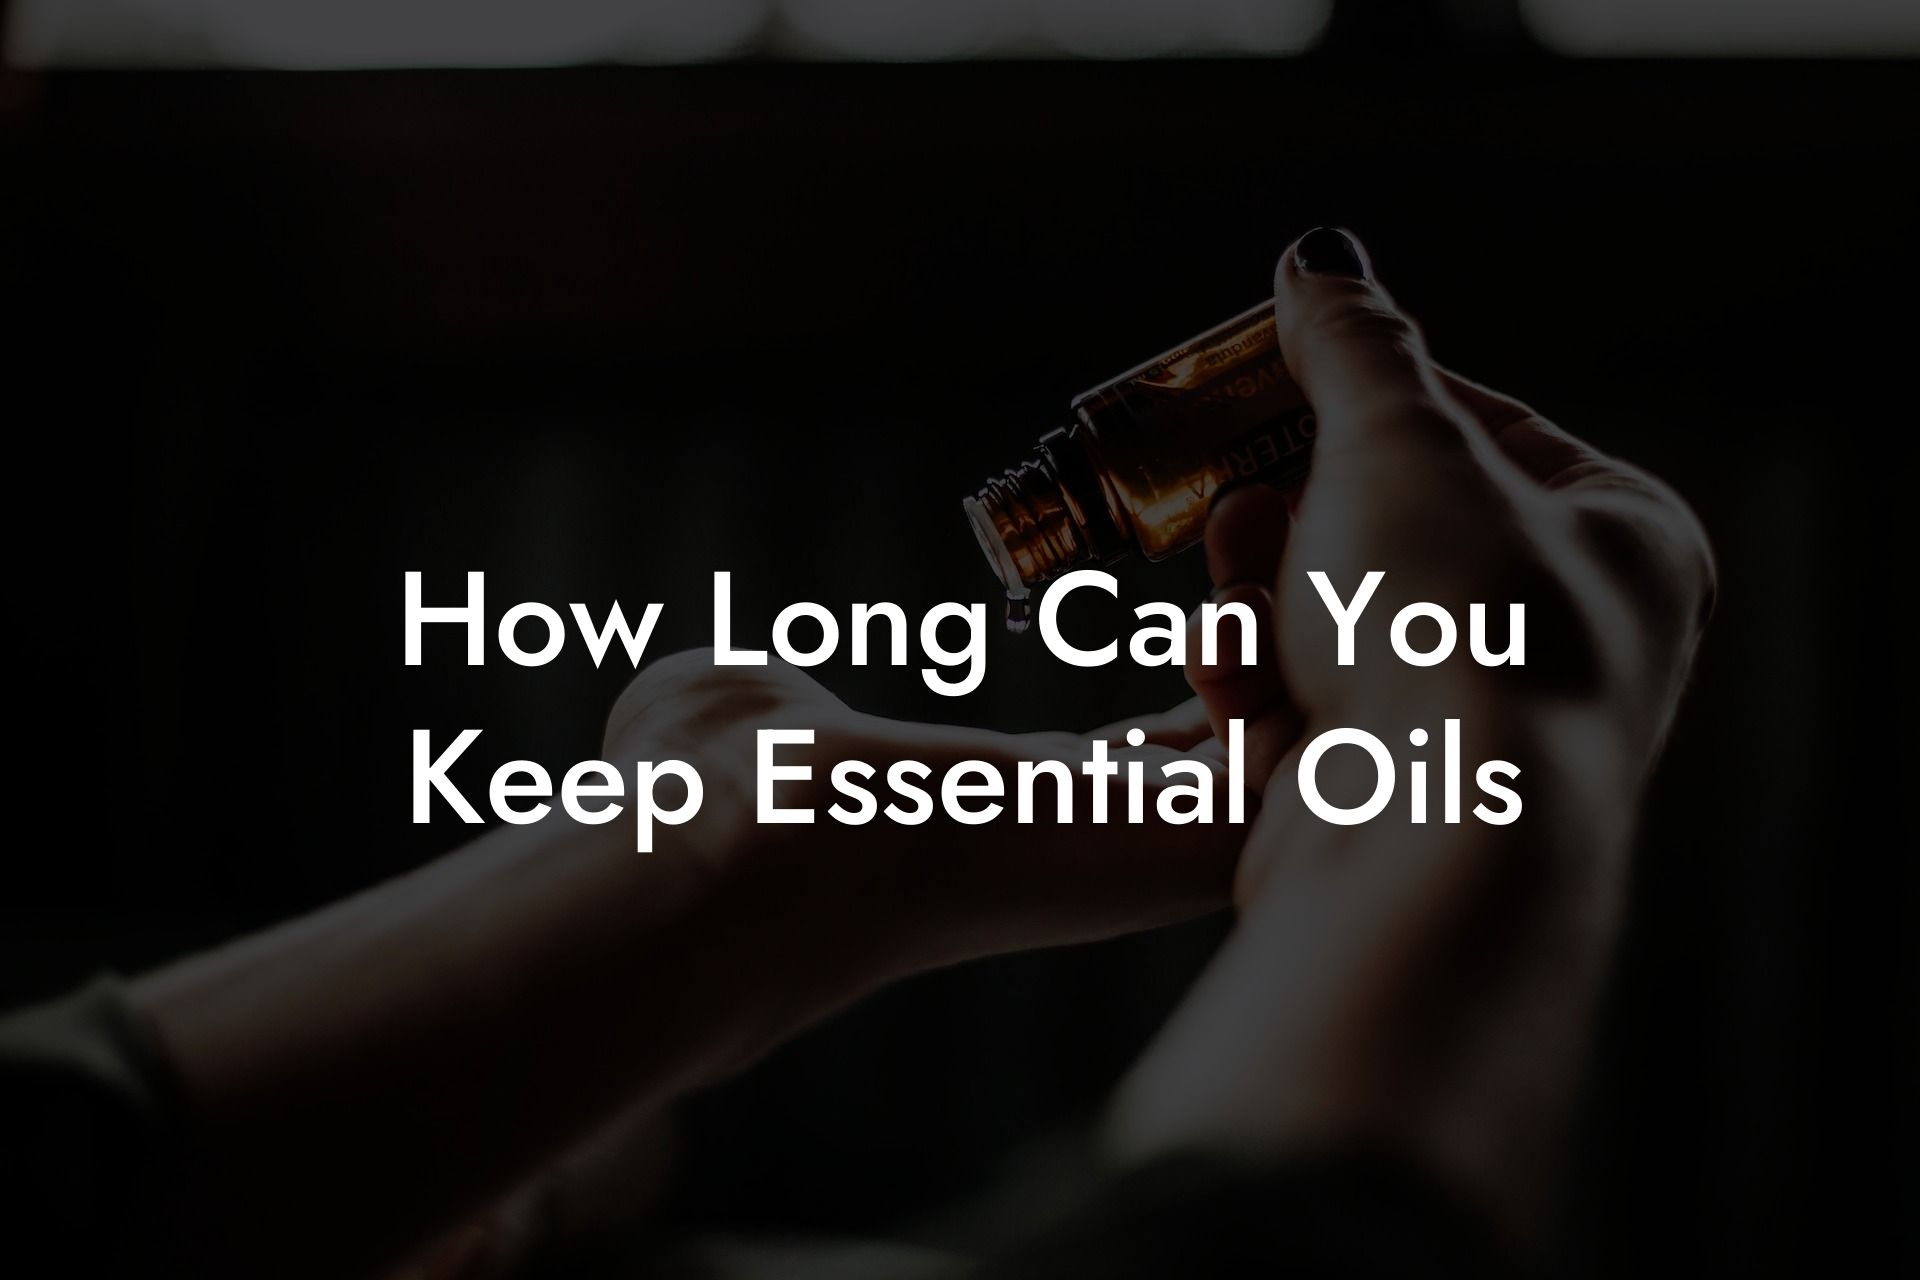 How Long Can You Keep Essential Oils